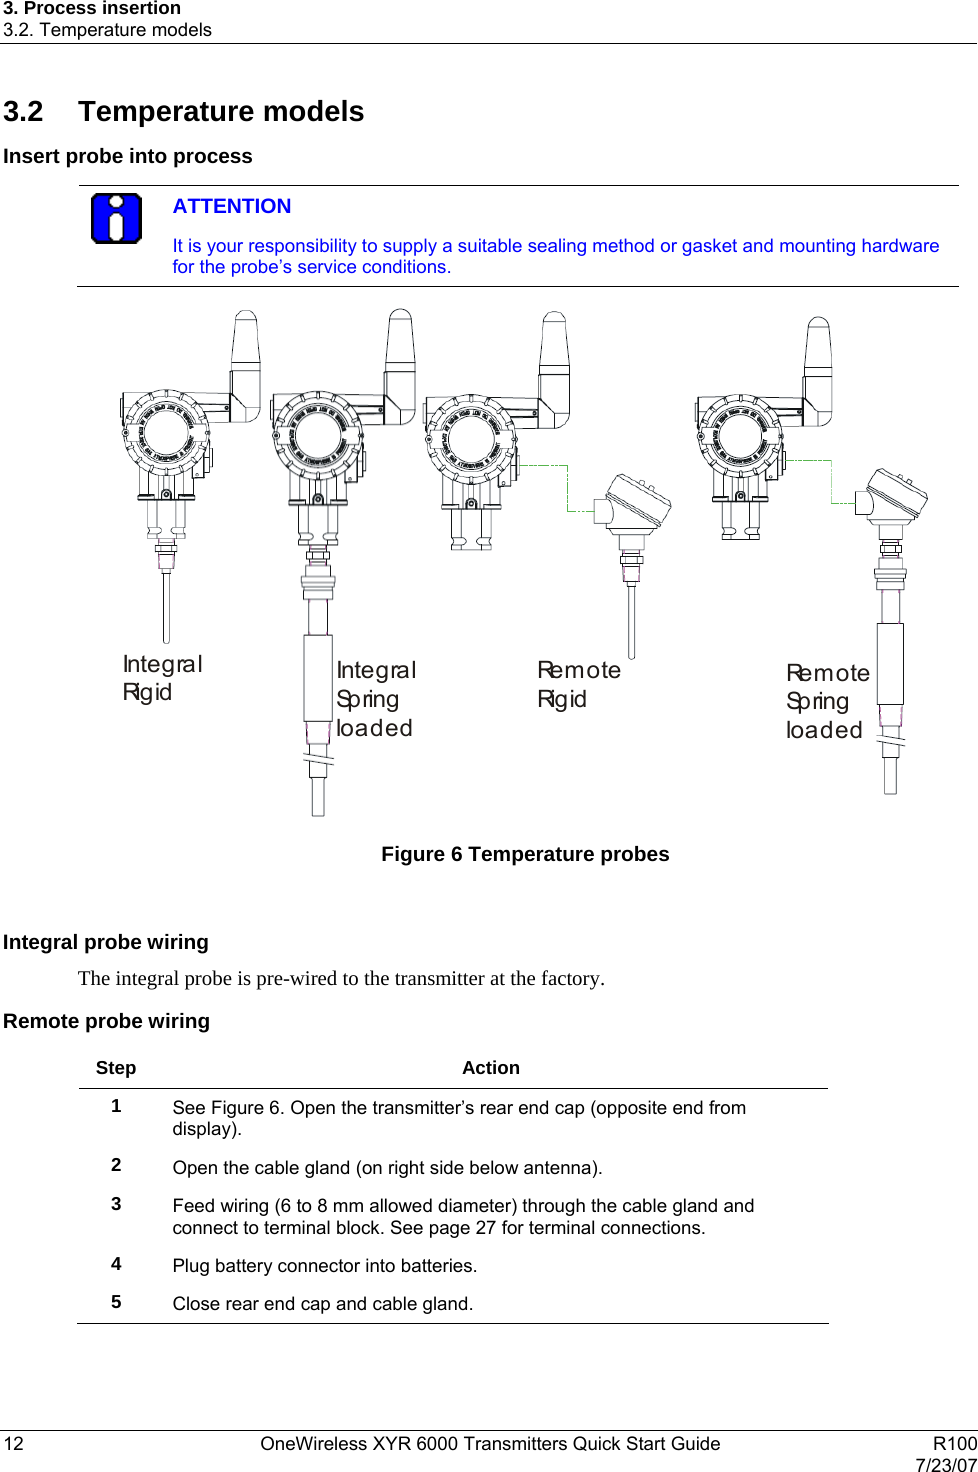 3. Process insertion 3.2. Temperature models 12  OneWireless XYR 6000 Transmitters Quick Start Guide   R100   7/23/07 3.2 Temperature models Insert probe into process   ATTENTION It is your responsibility to supply a suitable sealing method or gasket and mounting hardware for the probe’s service conditions.   Inte g ra lRi g i d Inte g ra lSp r i n gloadedRe m o t eRi g i dRe m o t eSp r i n gloaded Figure 6 Temperature probes  Integral probe wiring The integral probe is pre-wired to the transmitter at the factory.  Remote probe wiring  Step Action 1  See Figure 6. Open the transmitter’s rear end cap (opposite end from display). 2  Open the cable gland (on right side below antenna). 3  Feed wiring (6 to 8 mm allowed diameter) through the cable gland and connect to terminal block. See page 27 for terminal connections. 4  Plug battery connector into batteries. 5  Close rear end cap and cable gland.   